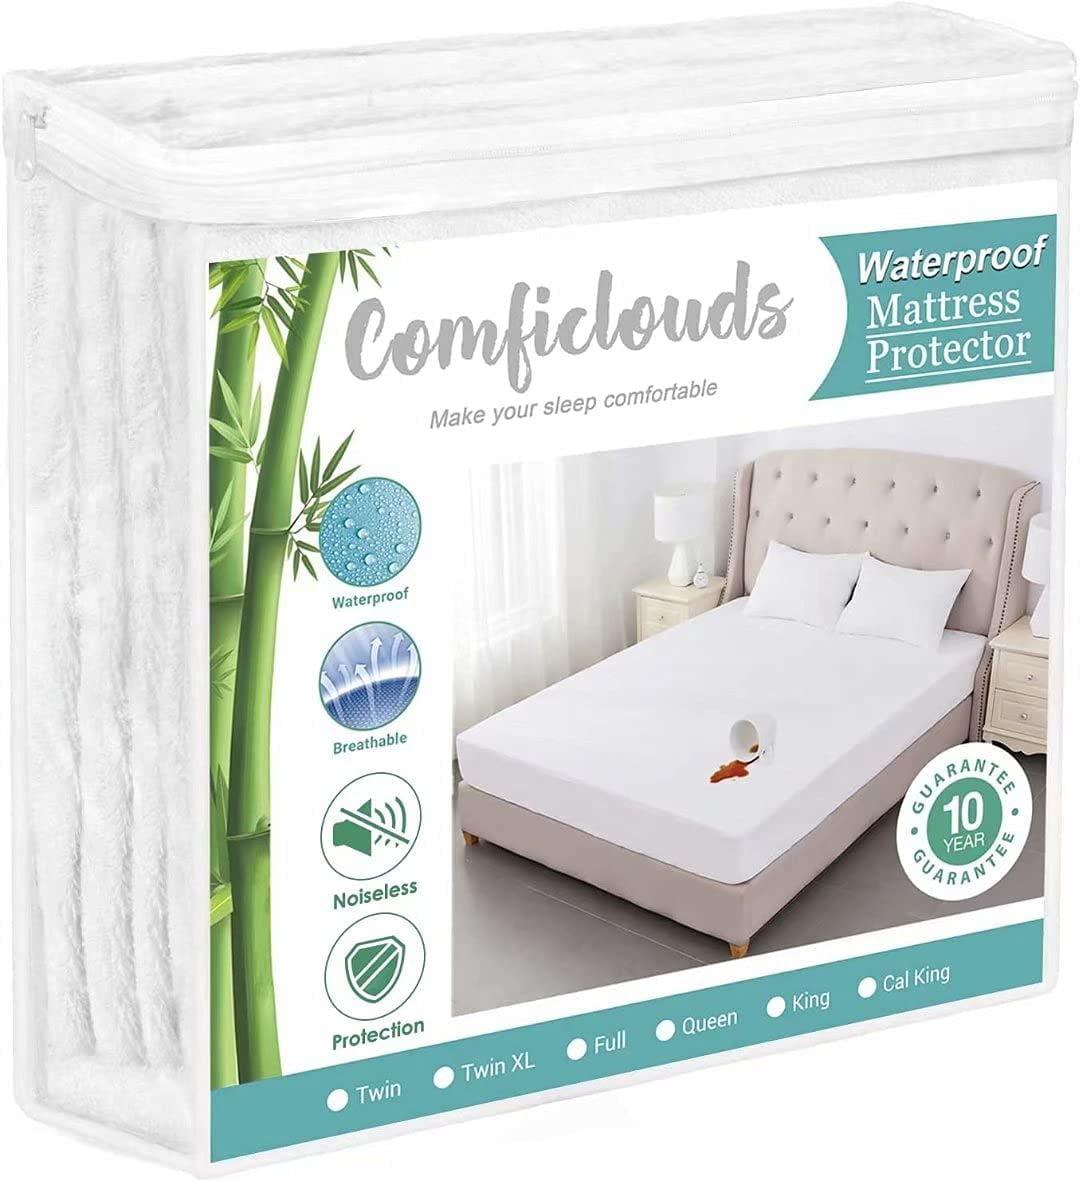 Mattress Protector Waterproof Bamboo Soft Hypoallergenic Fitted Pad Cover 5 size 